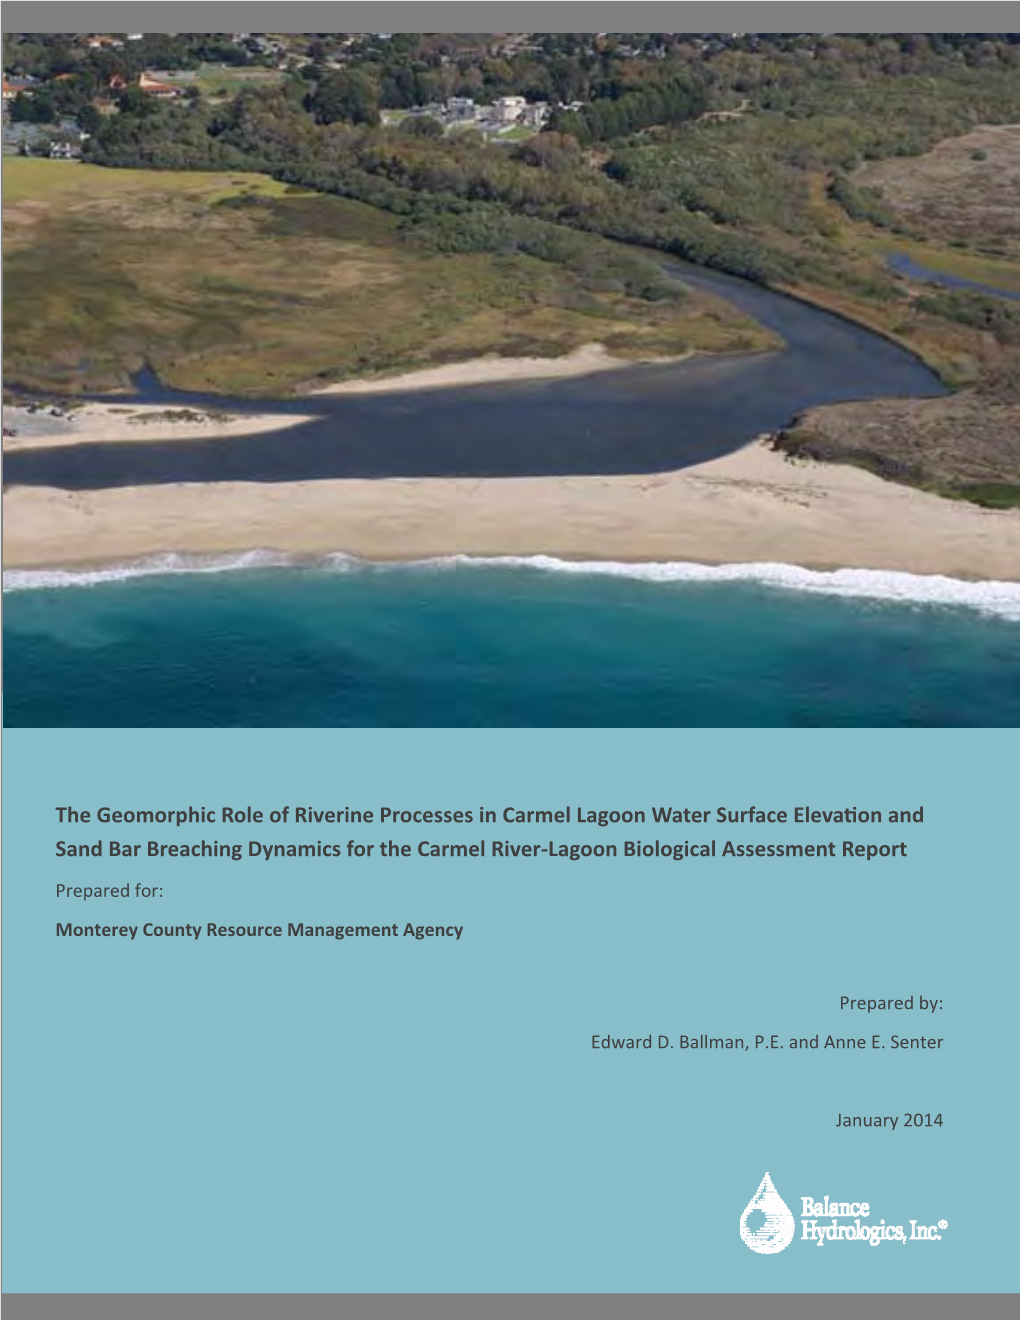 The Geomorphic Role of Riverine Processes in Carmel Lagoon Water